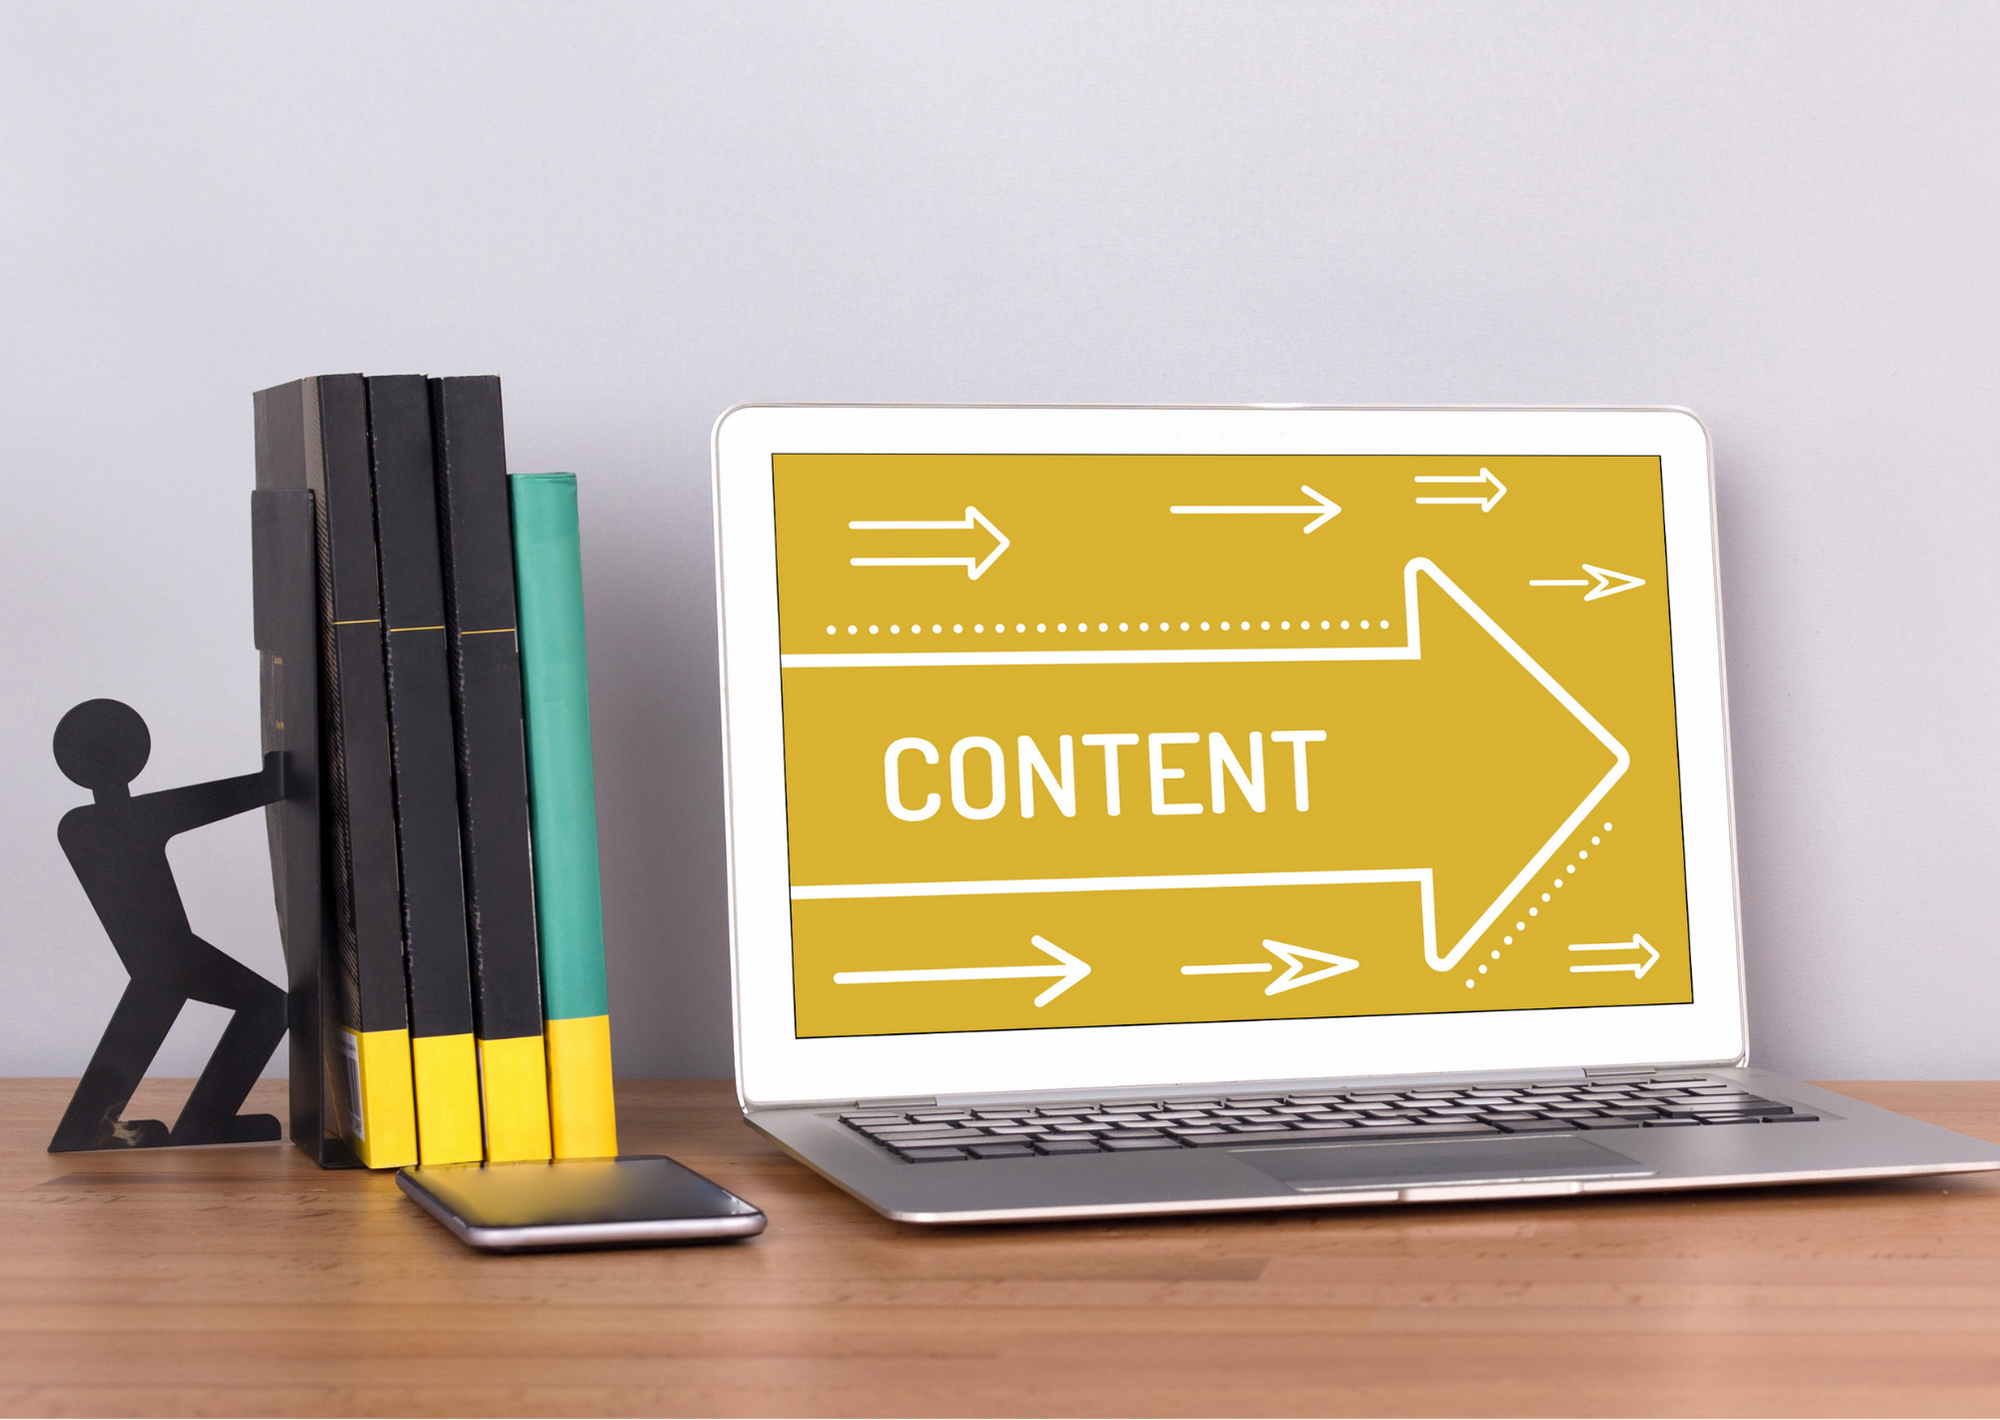 5 content tips for your start-up business